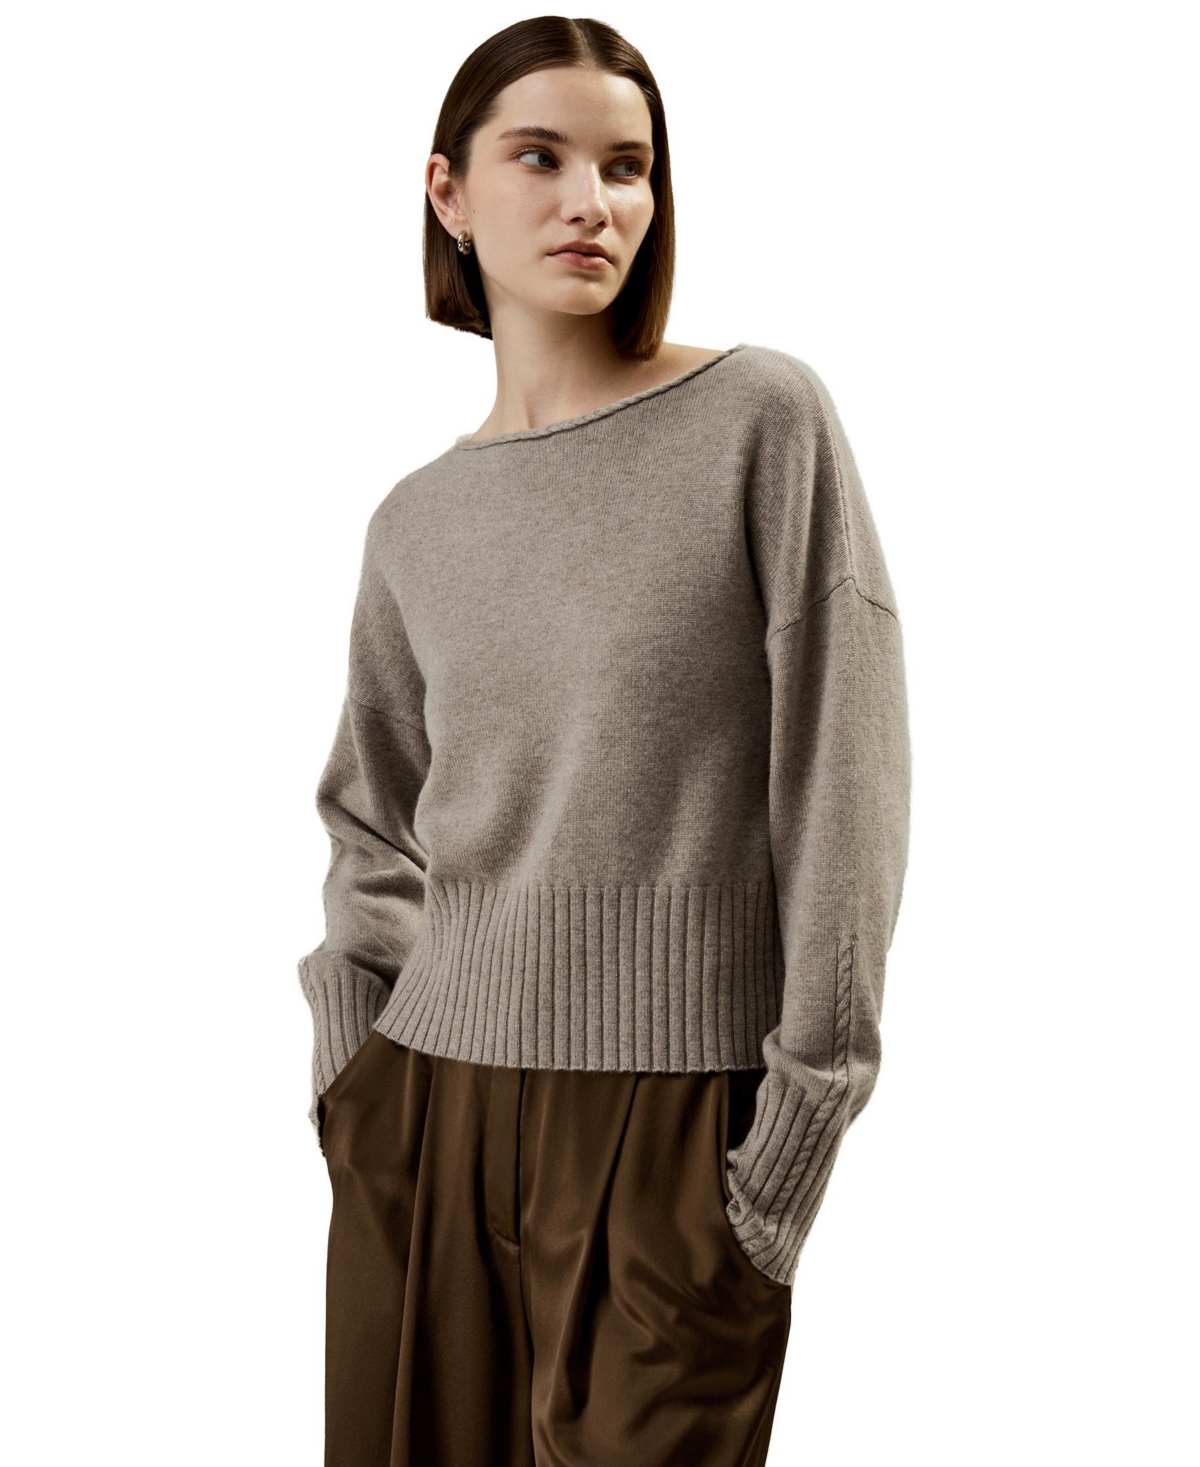 Braided Collar Wool and Cashmere Blend Sweater for Women - Camel